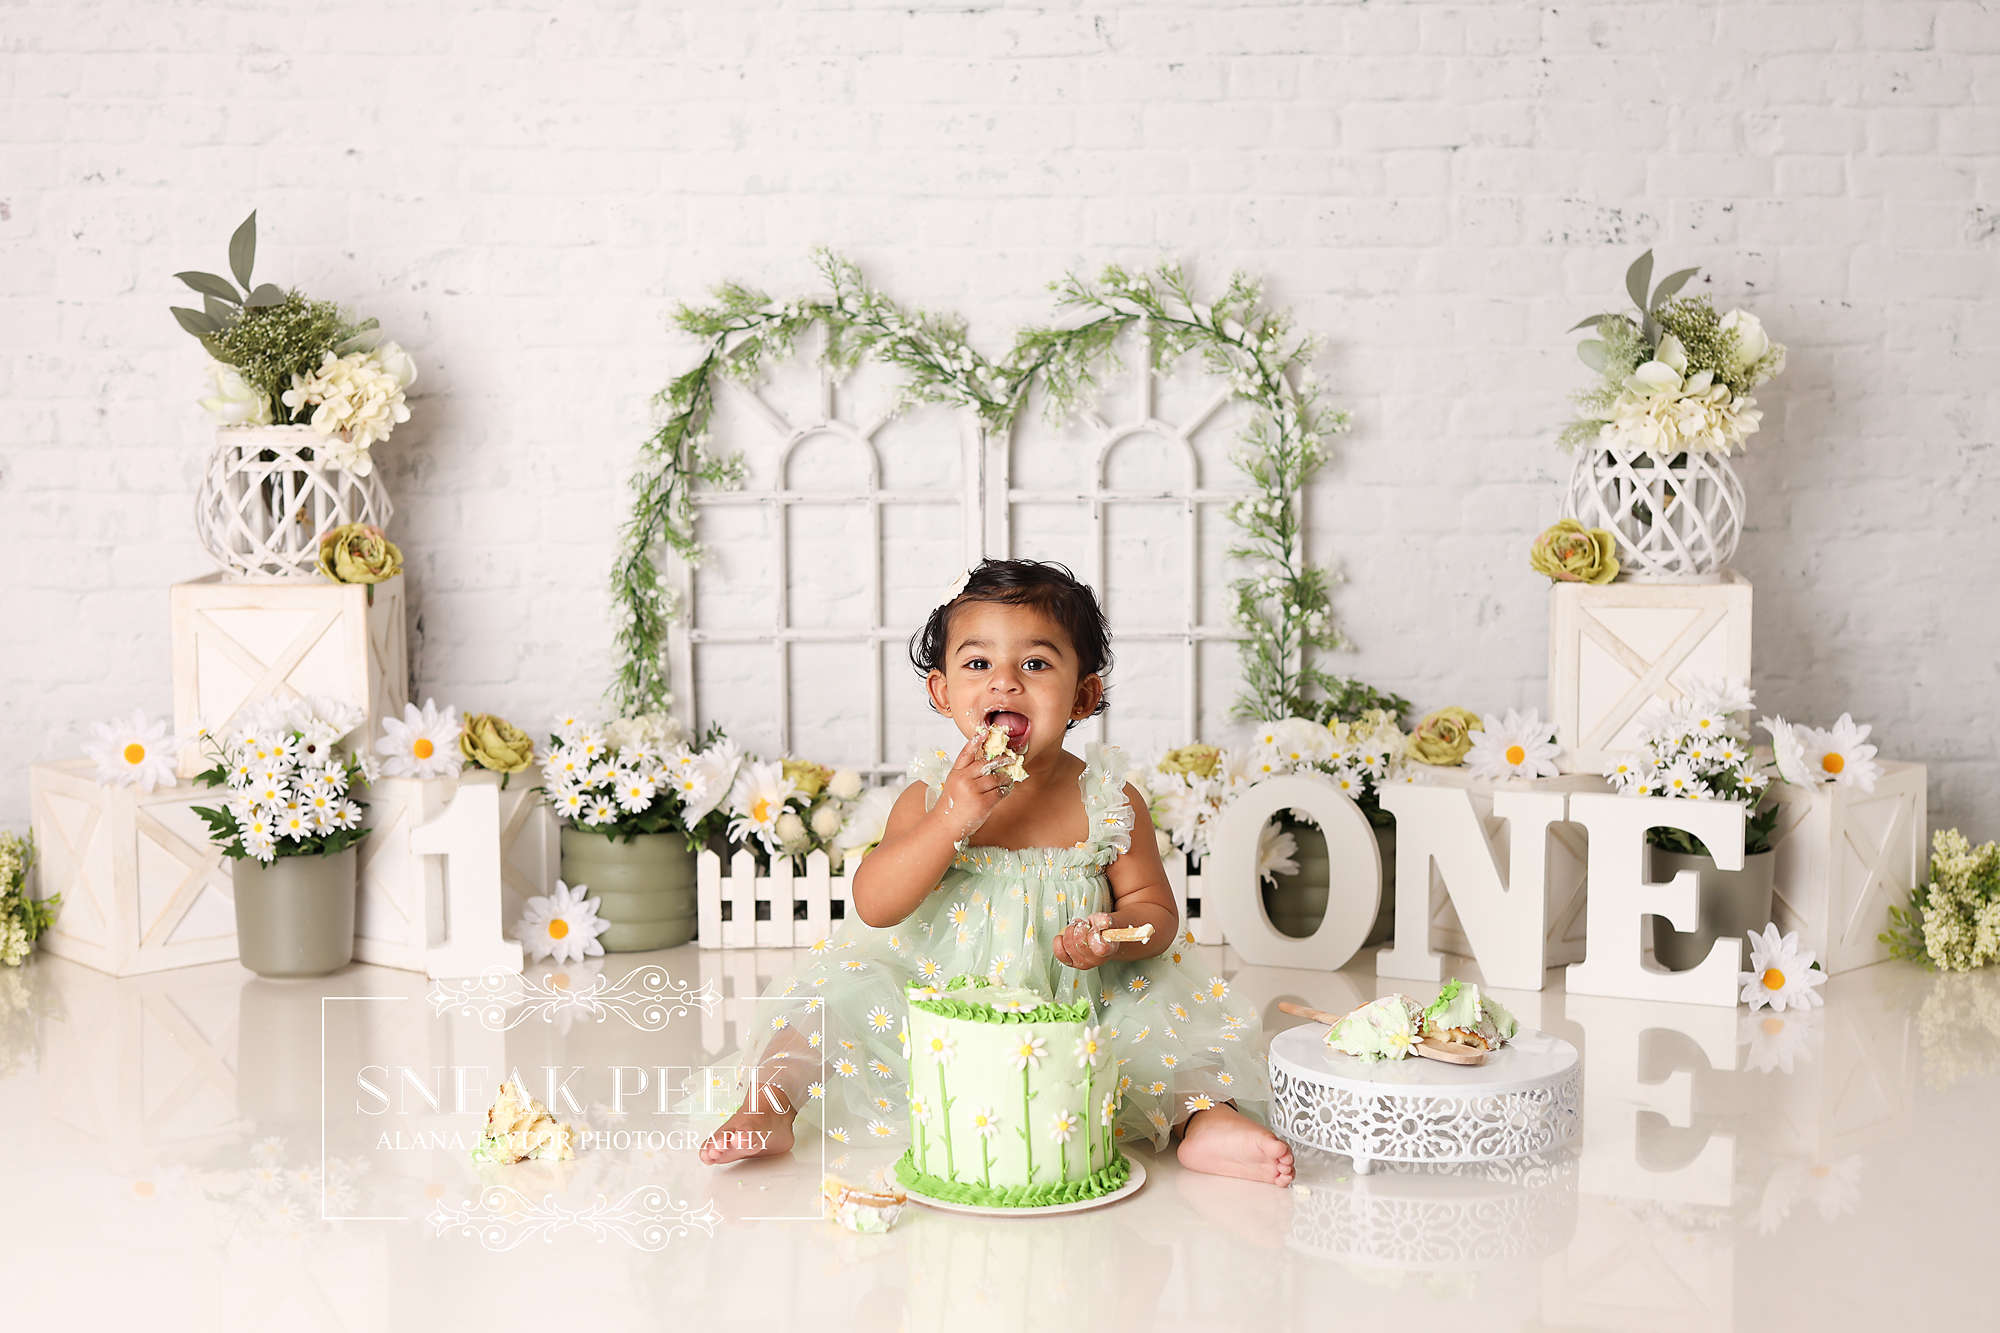 Alana Taylor Photography 2 Top 10 Best Cake Smash Photographers in the World - 43